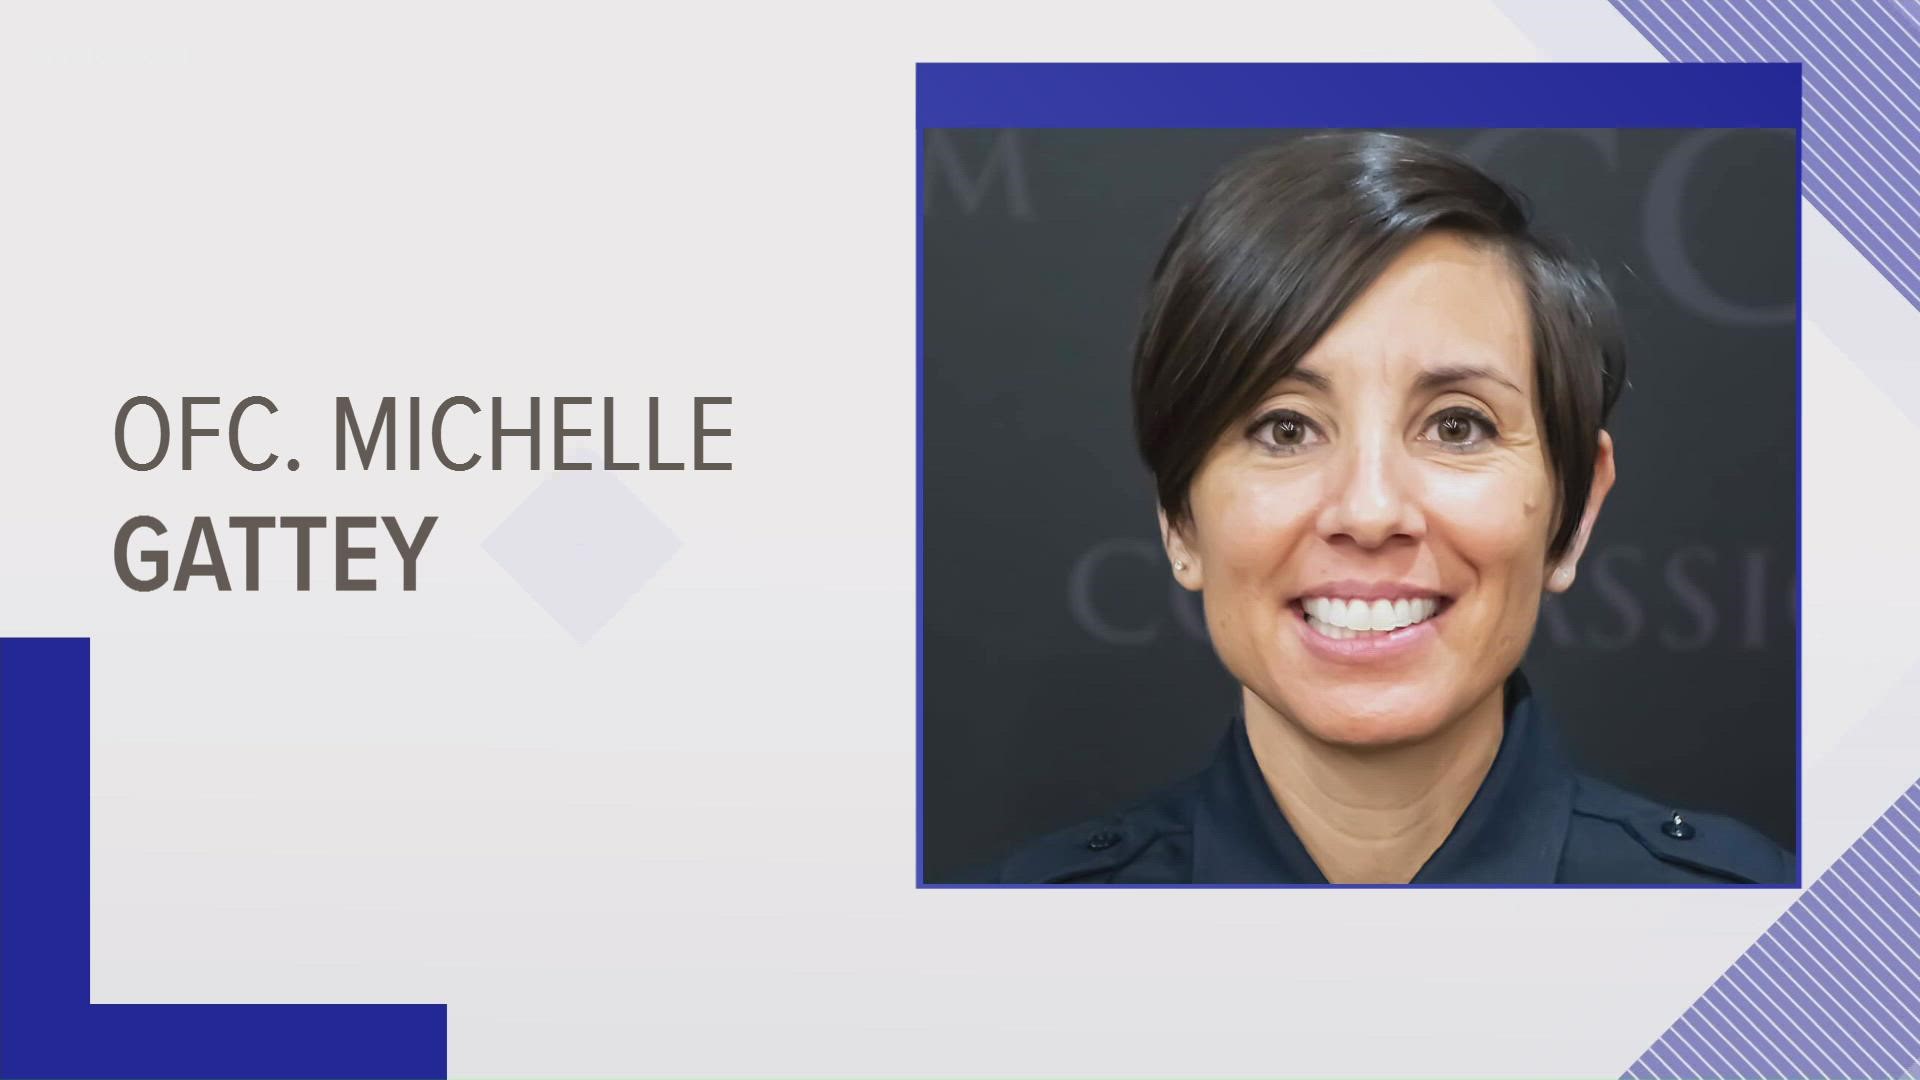 Michelle Gattey, 44, died on Sept. 18 after a battle with COVID-19. On Saturday, her family, fellow police officers and the community remembered her life of service.